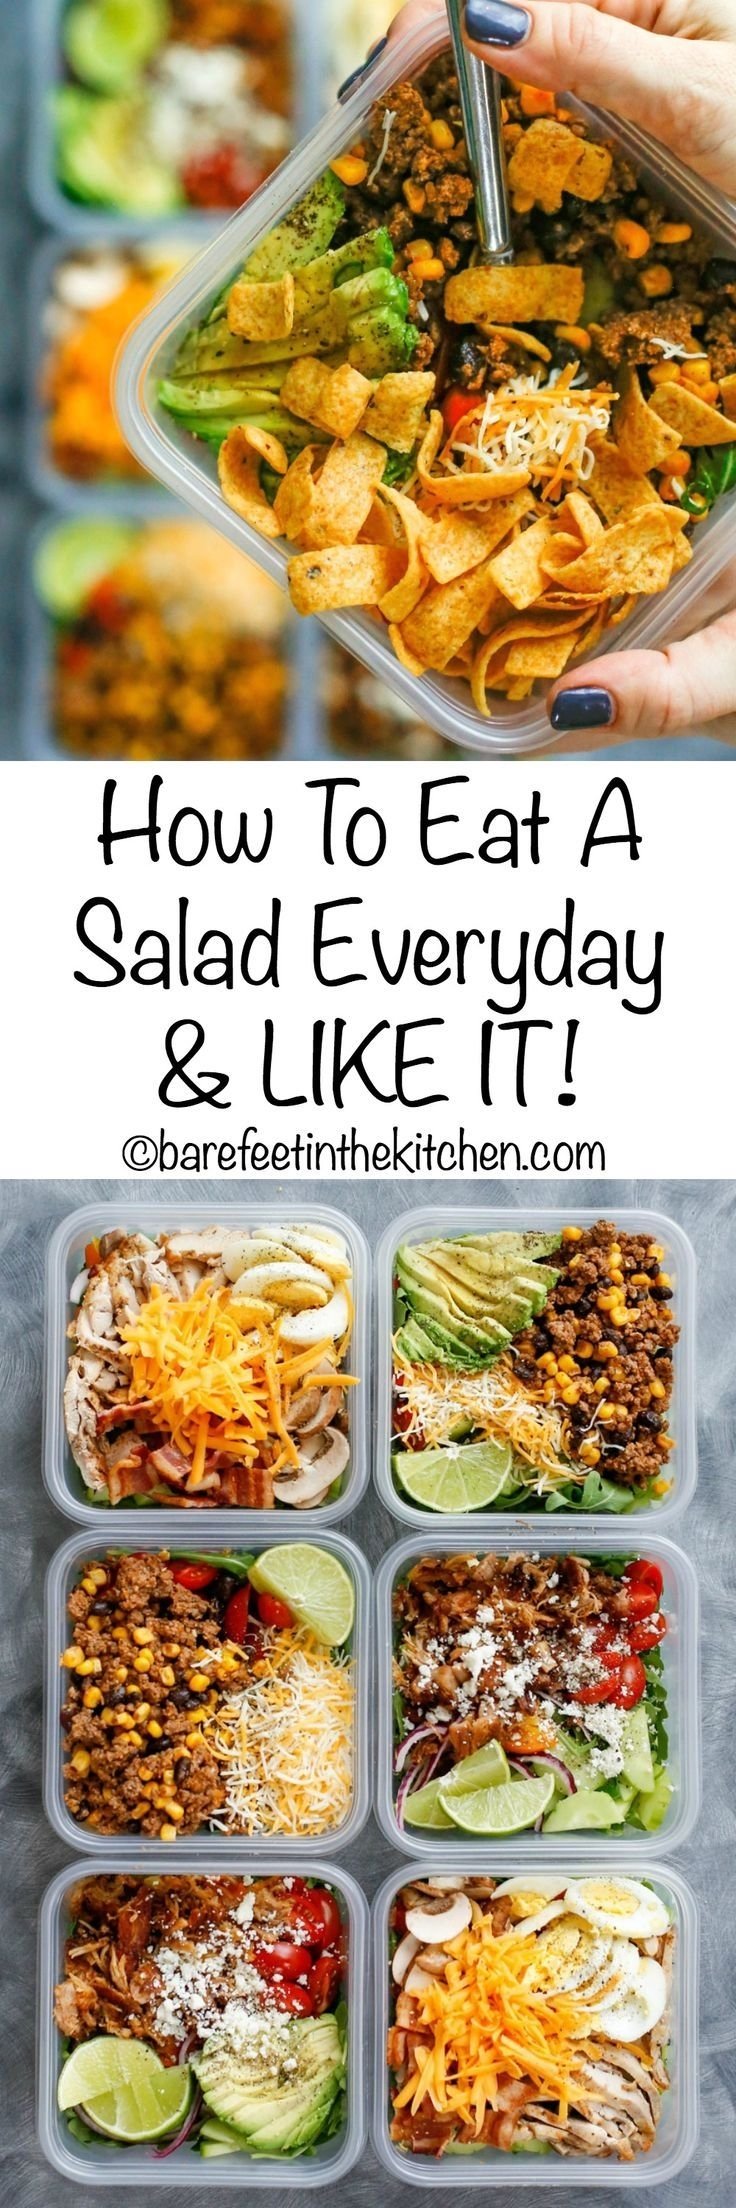 10 Best Best Lunch Ideas For Work 40 best lunch ideas images on pinterest cooking food healthy eats 2 2022